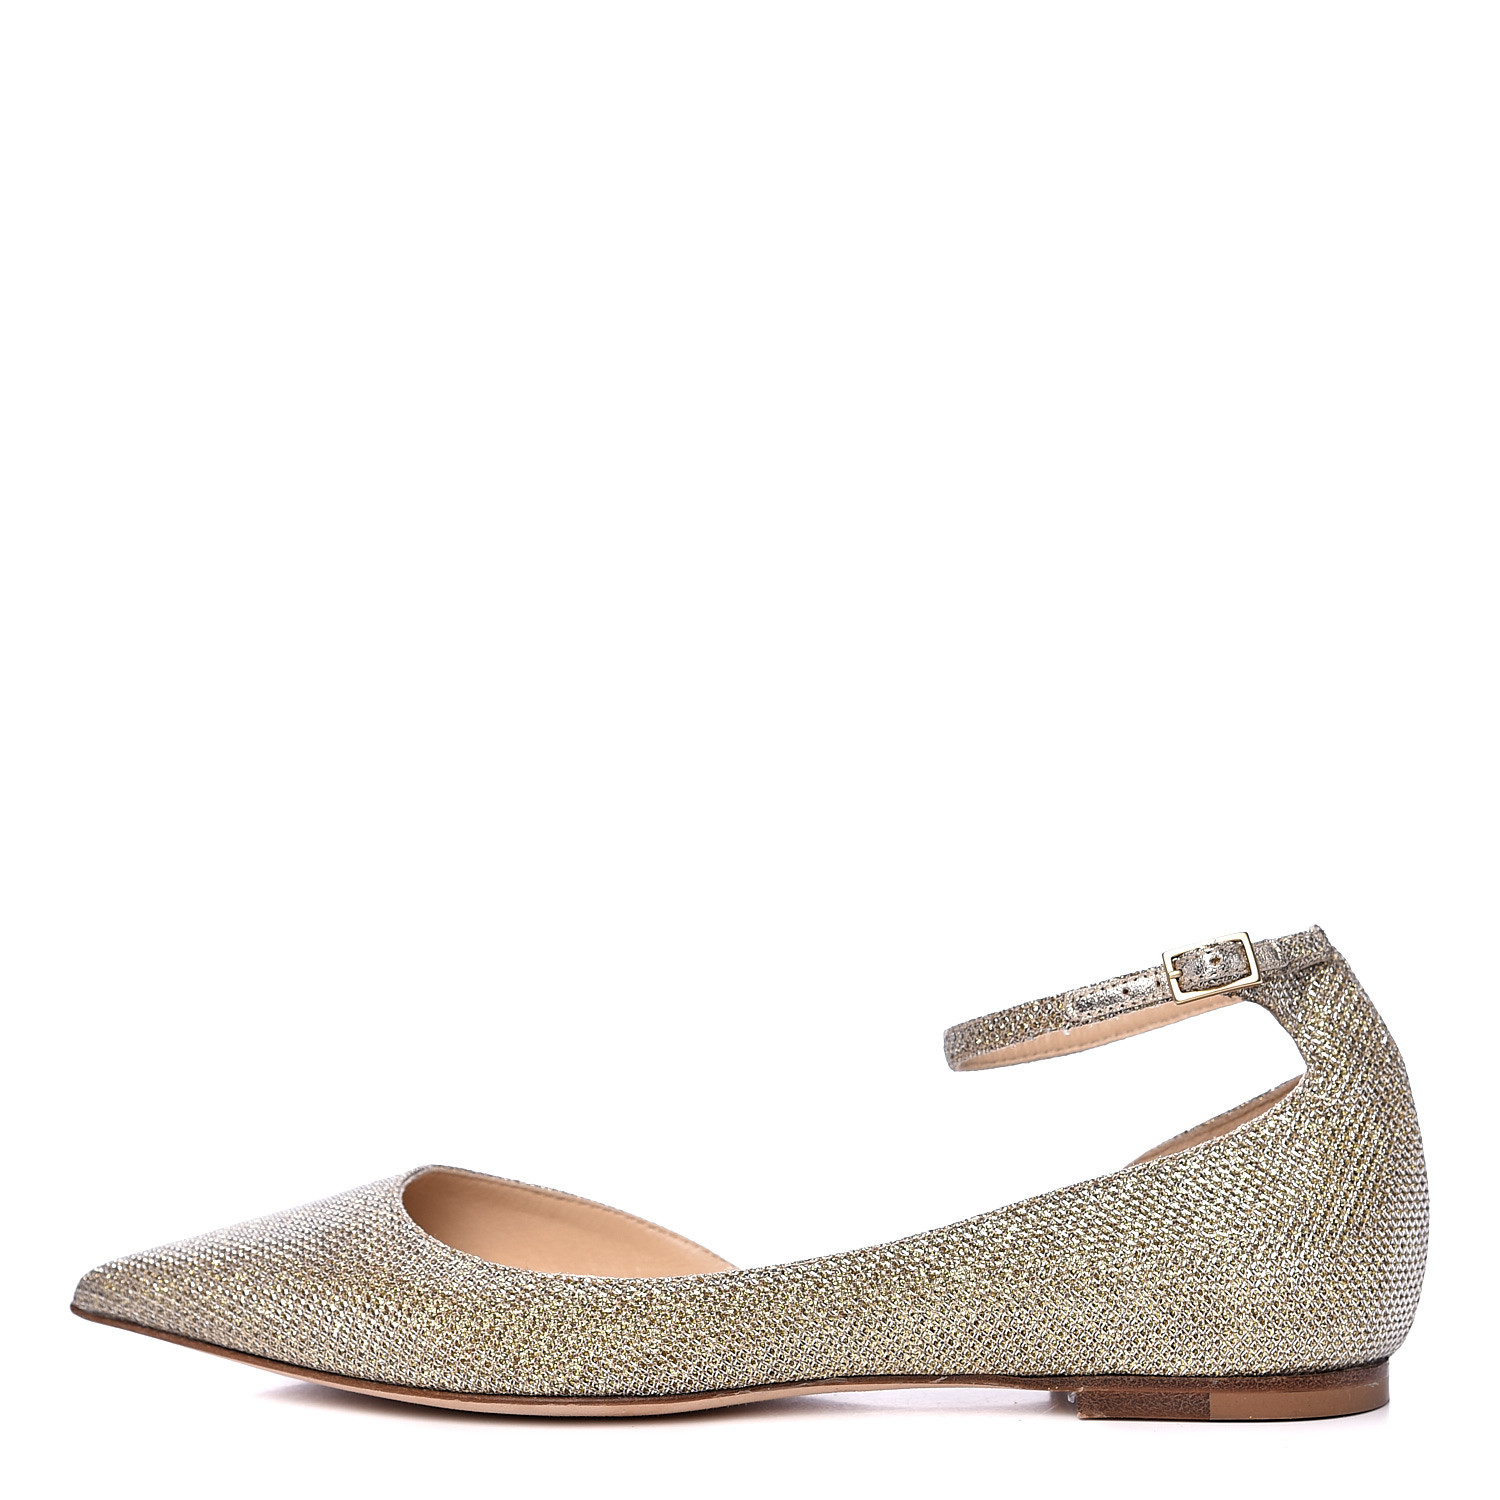 glitter flats with ankle strap